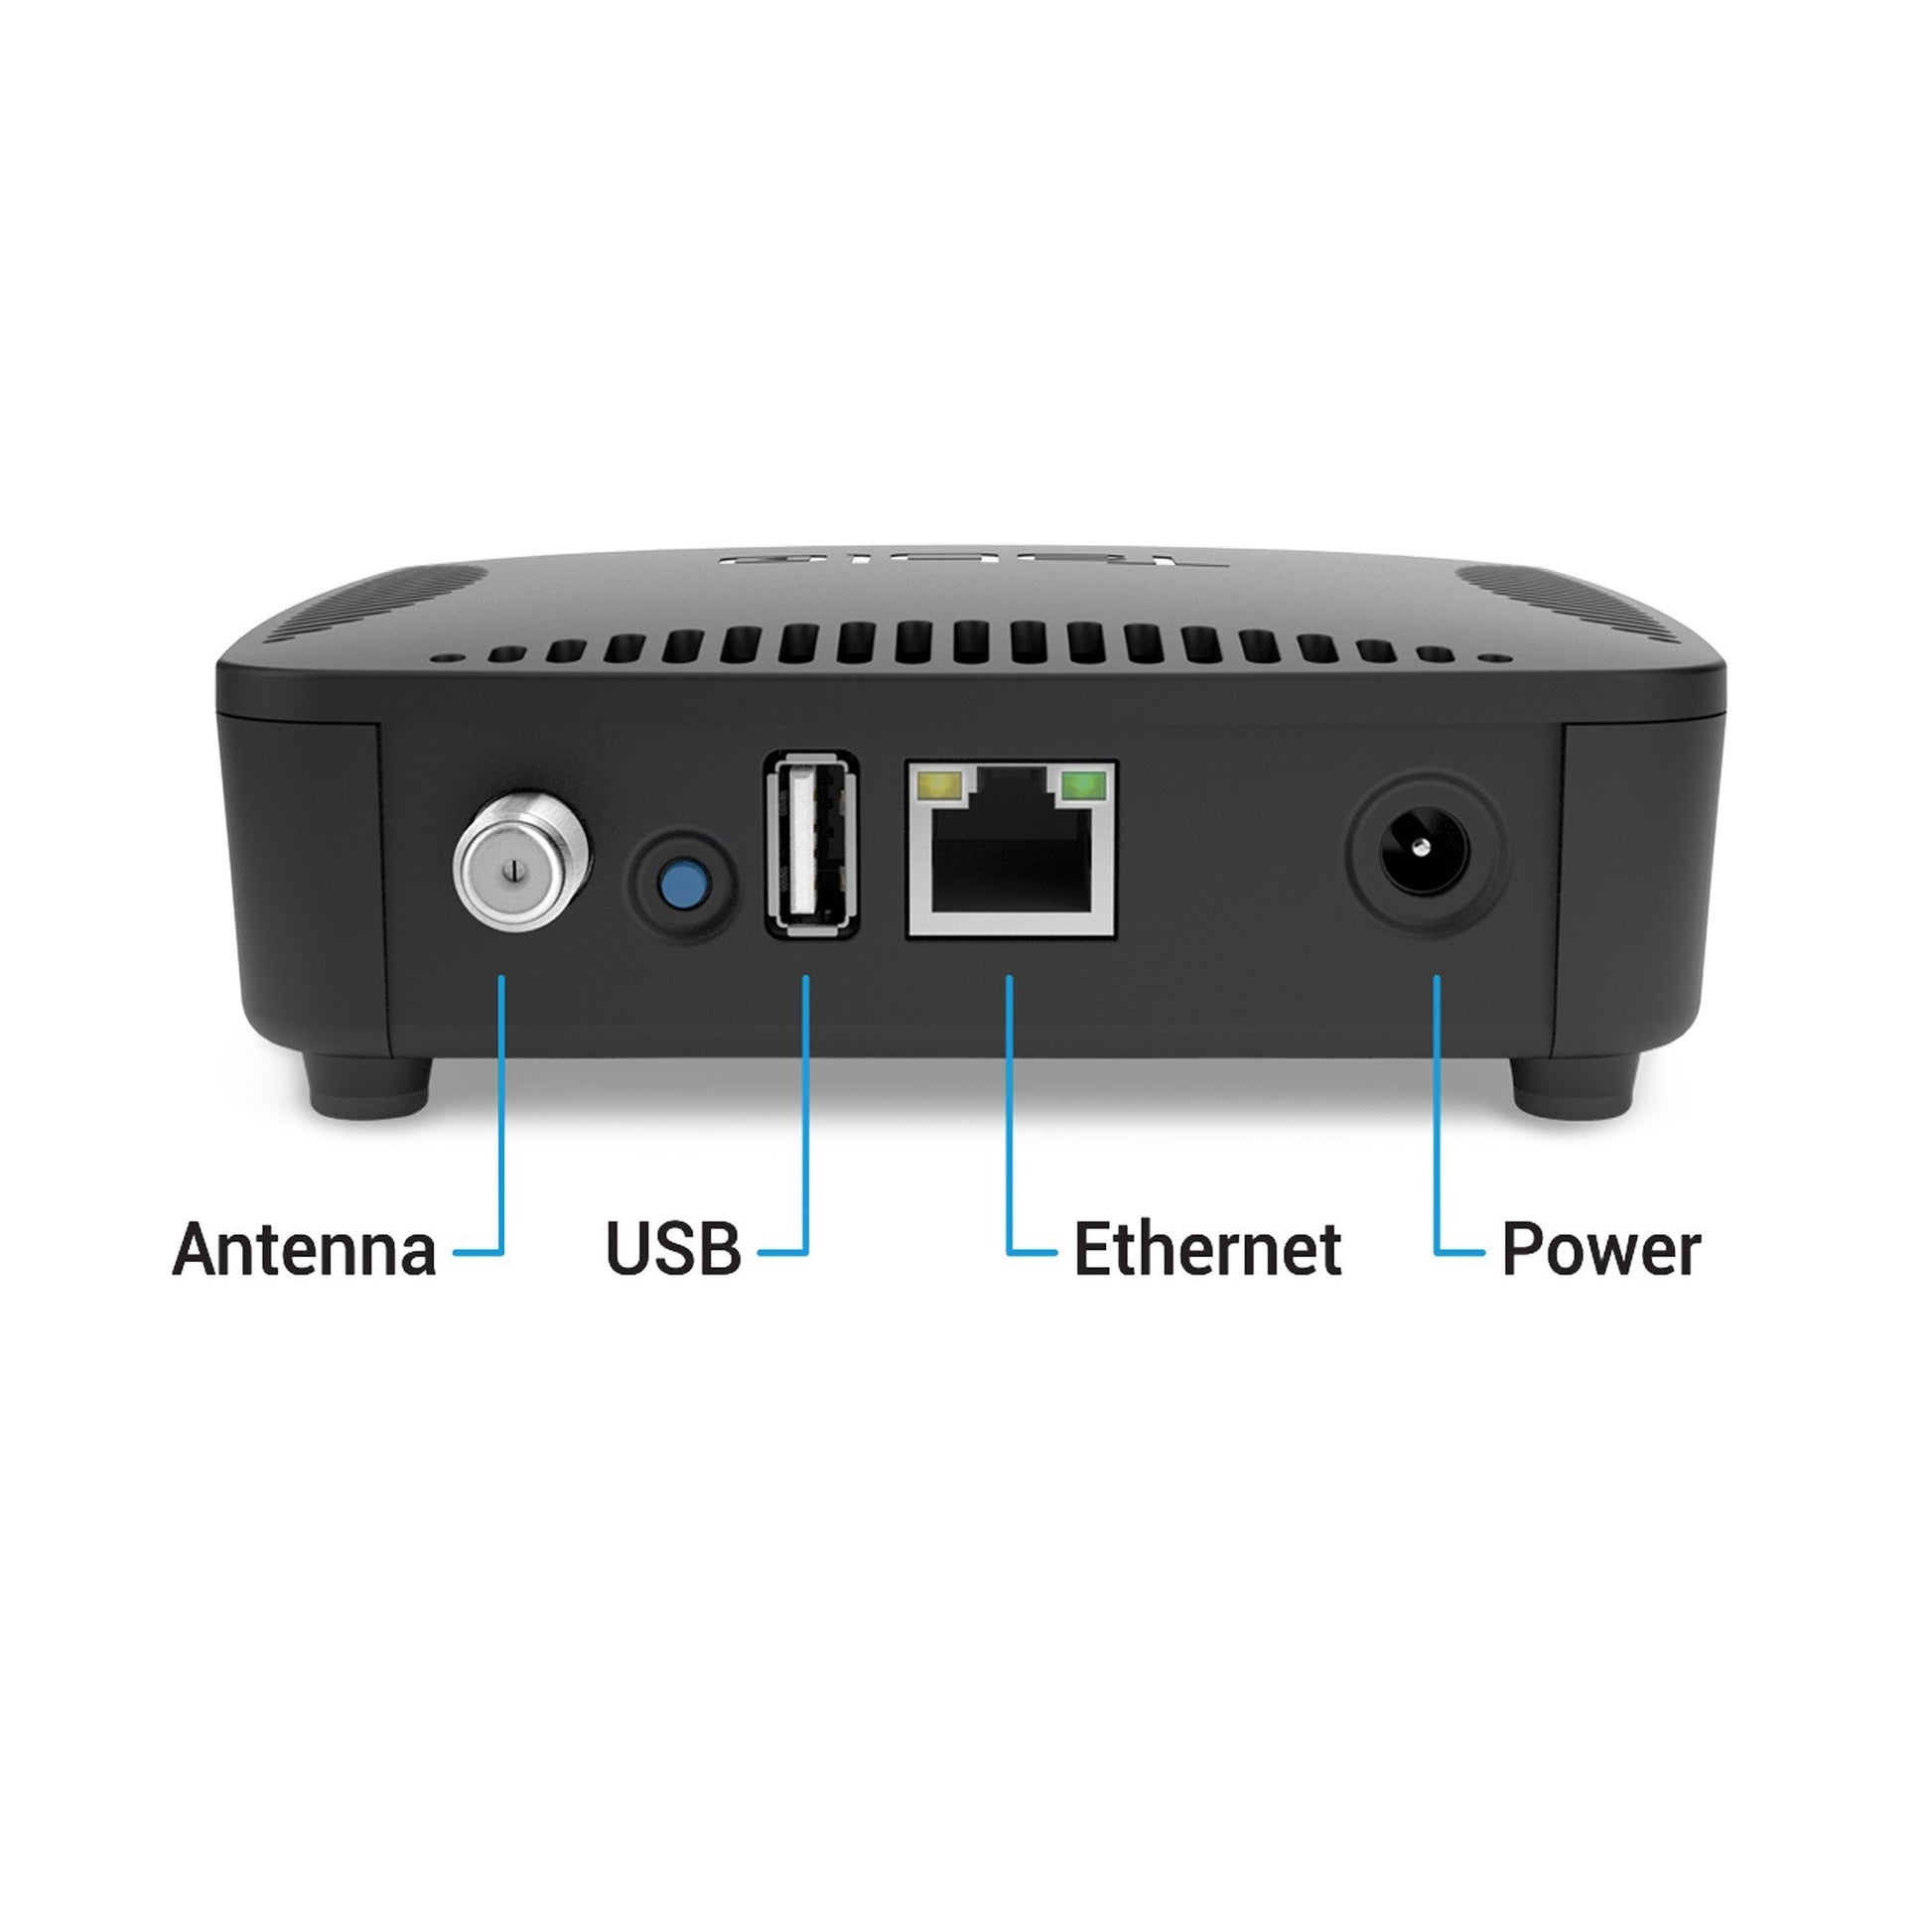 Tablo DUAL LITE Over-The-Air (OTA) DVR (Digital Video Recorder) for Cord Cutters. DVR hardware rear view with inputs labelled.